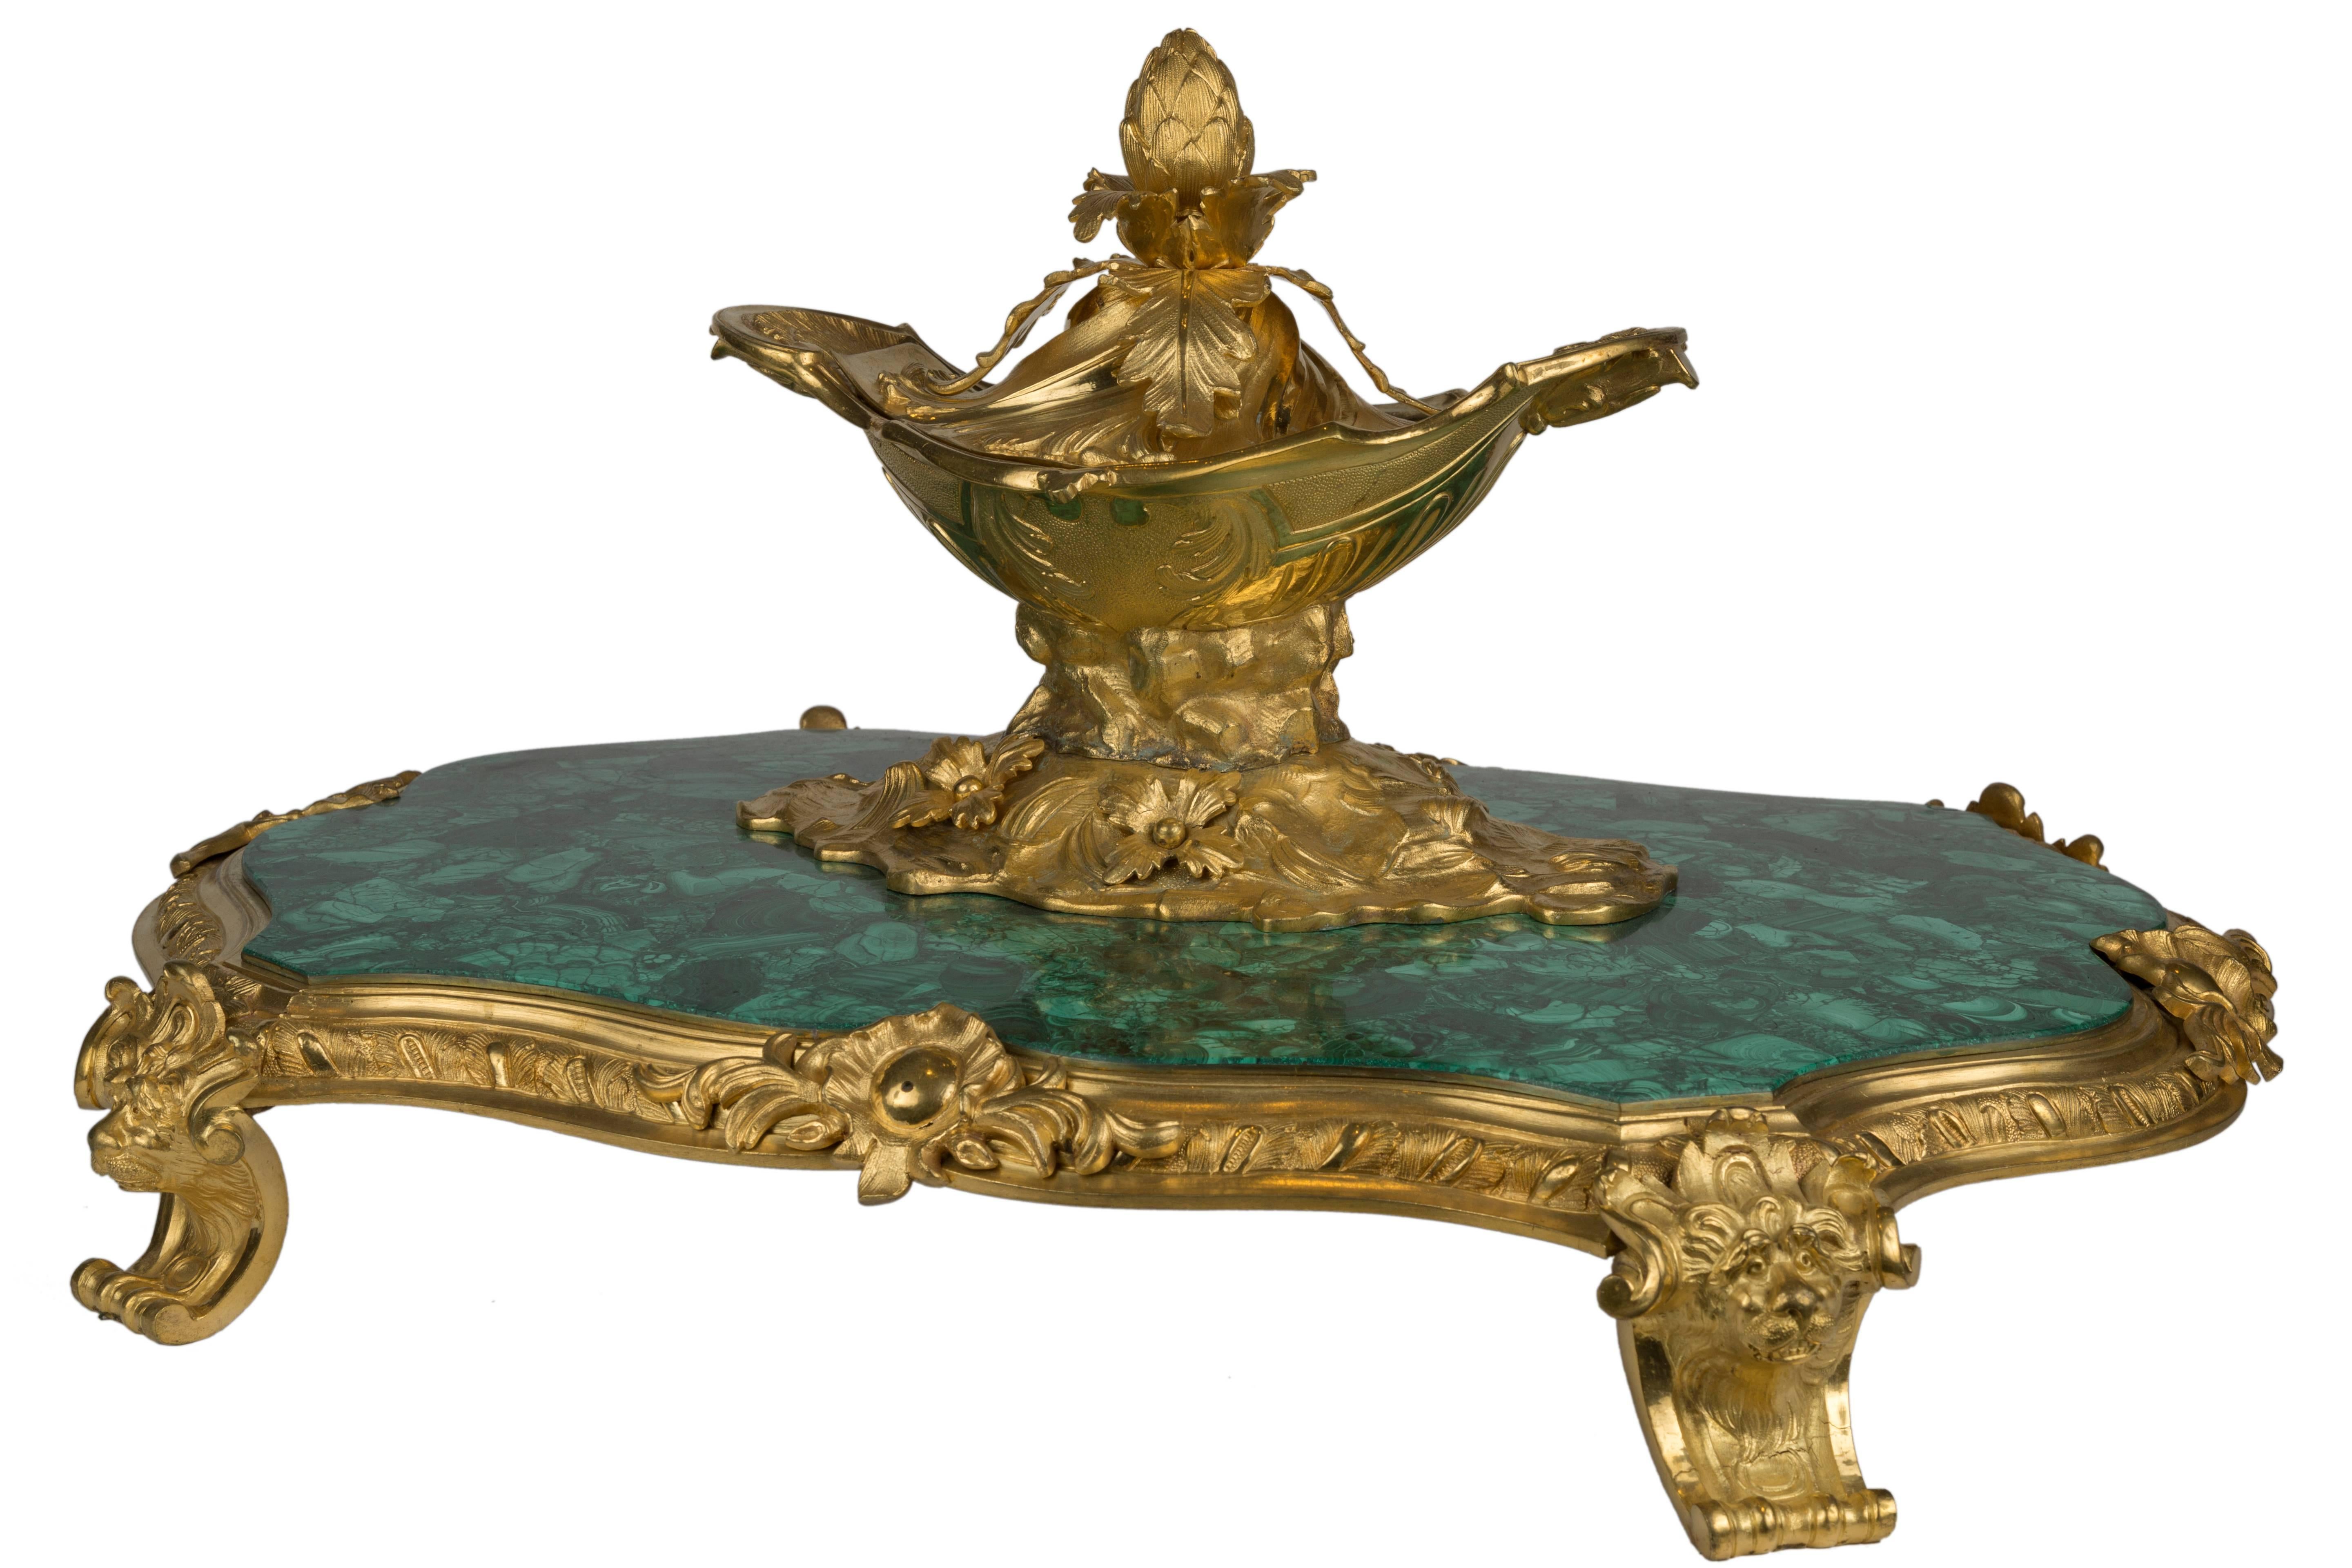 Hand-Carved 19th Century Large Malachite and Ormolu-Mounted Centerpiece For Sale